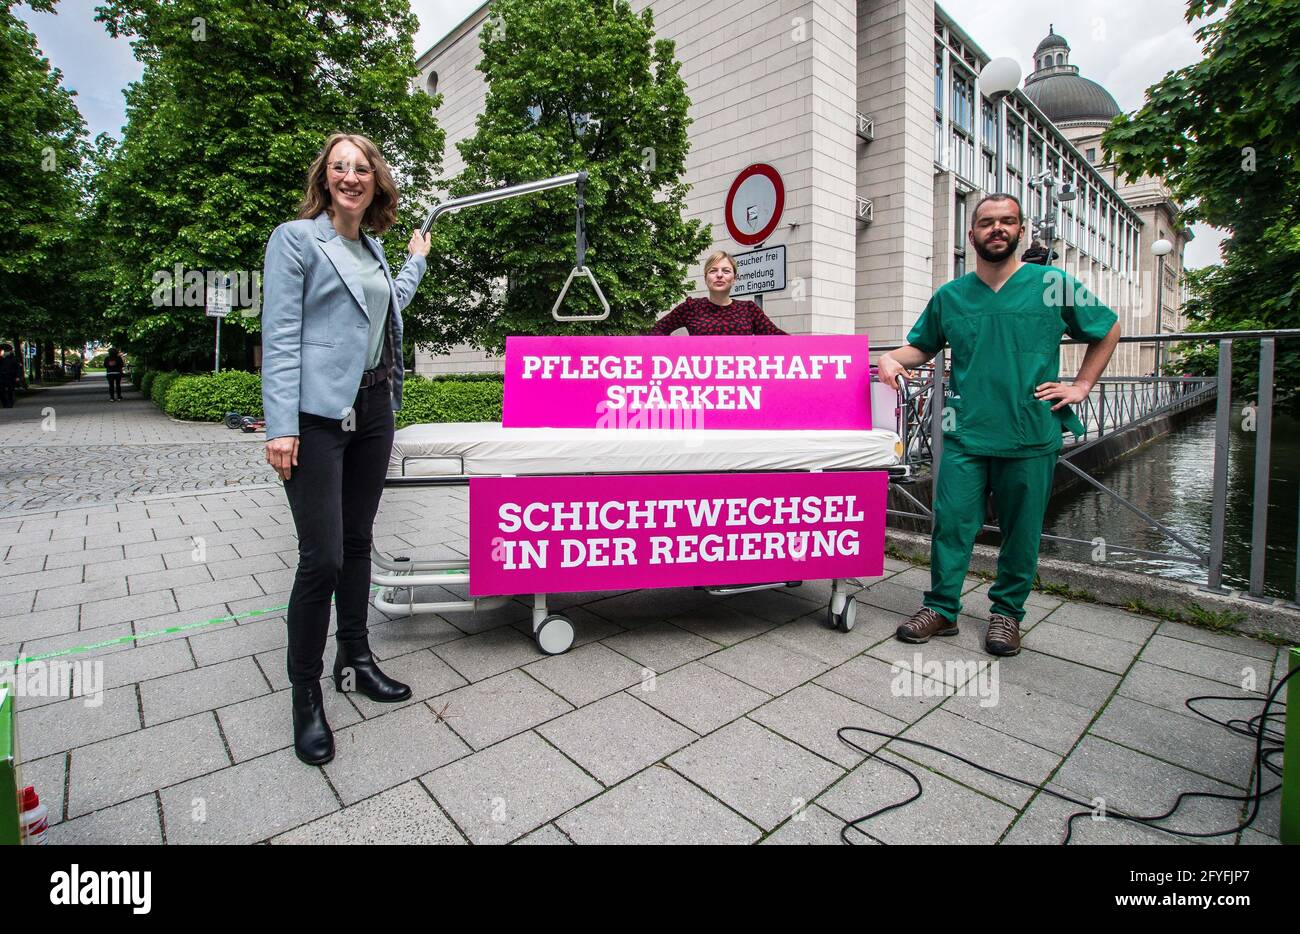 May 28, 2021, Munich, Bavaria, Germany: EVA LETTENBAUER, KATHARINA SCHULZE, and ANDREAS KAHL of the Bavarian Greens. The Bavarian Greens (die Gruenen/Buendnis90) organized a protest action at the Bavarian Staatskanzlei (government building) in support of healthcare workers. During the Coronavirus crisis, the working conditions for this sector have come into greater focus and The Greens are pushing for better politics for this sector where pay structures and working conditions are improved and there exists a pathway for communication between the workers and political structures. (Credit Image Stock Photo